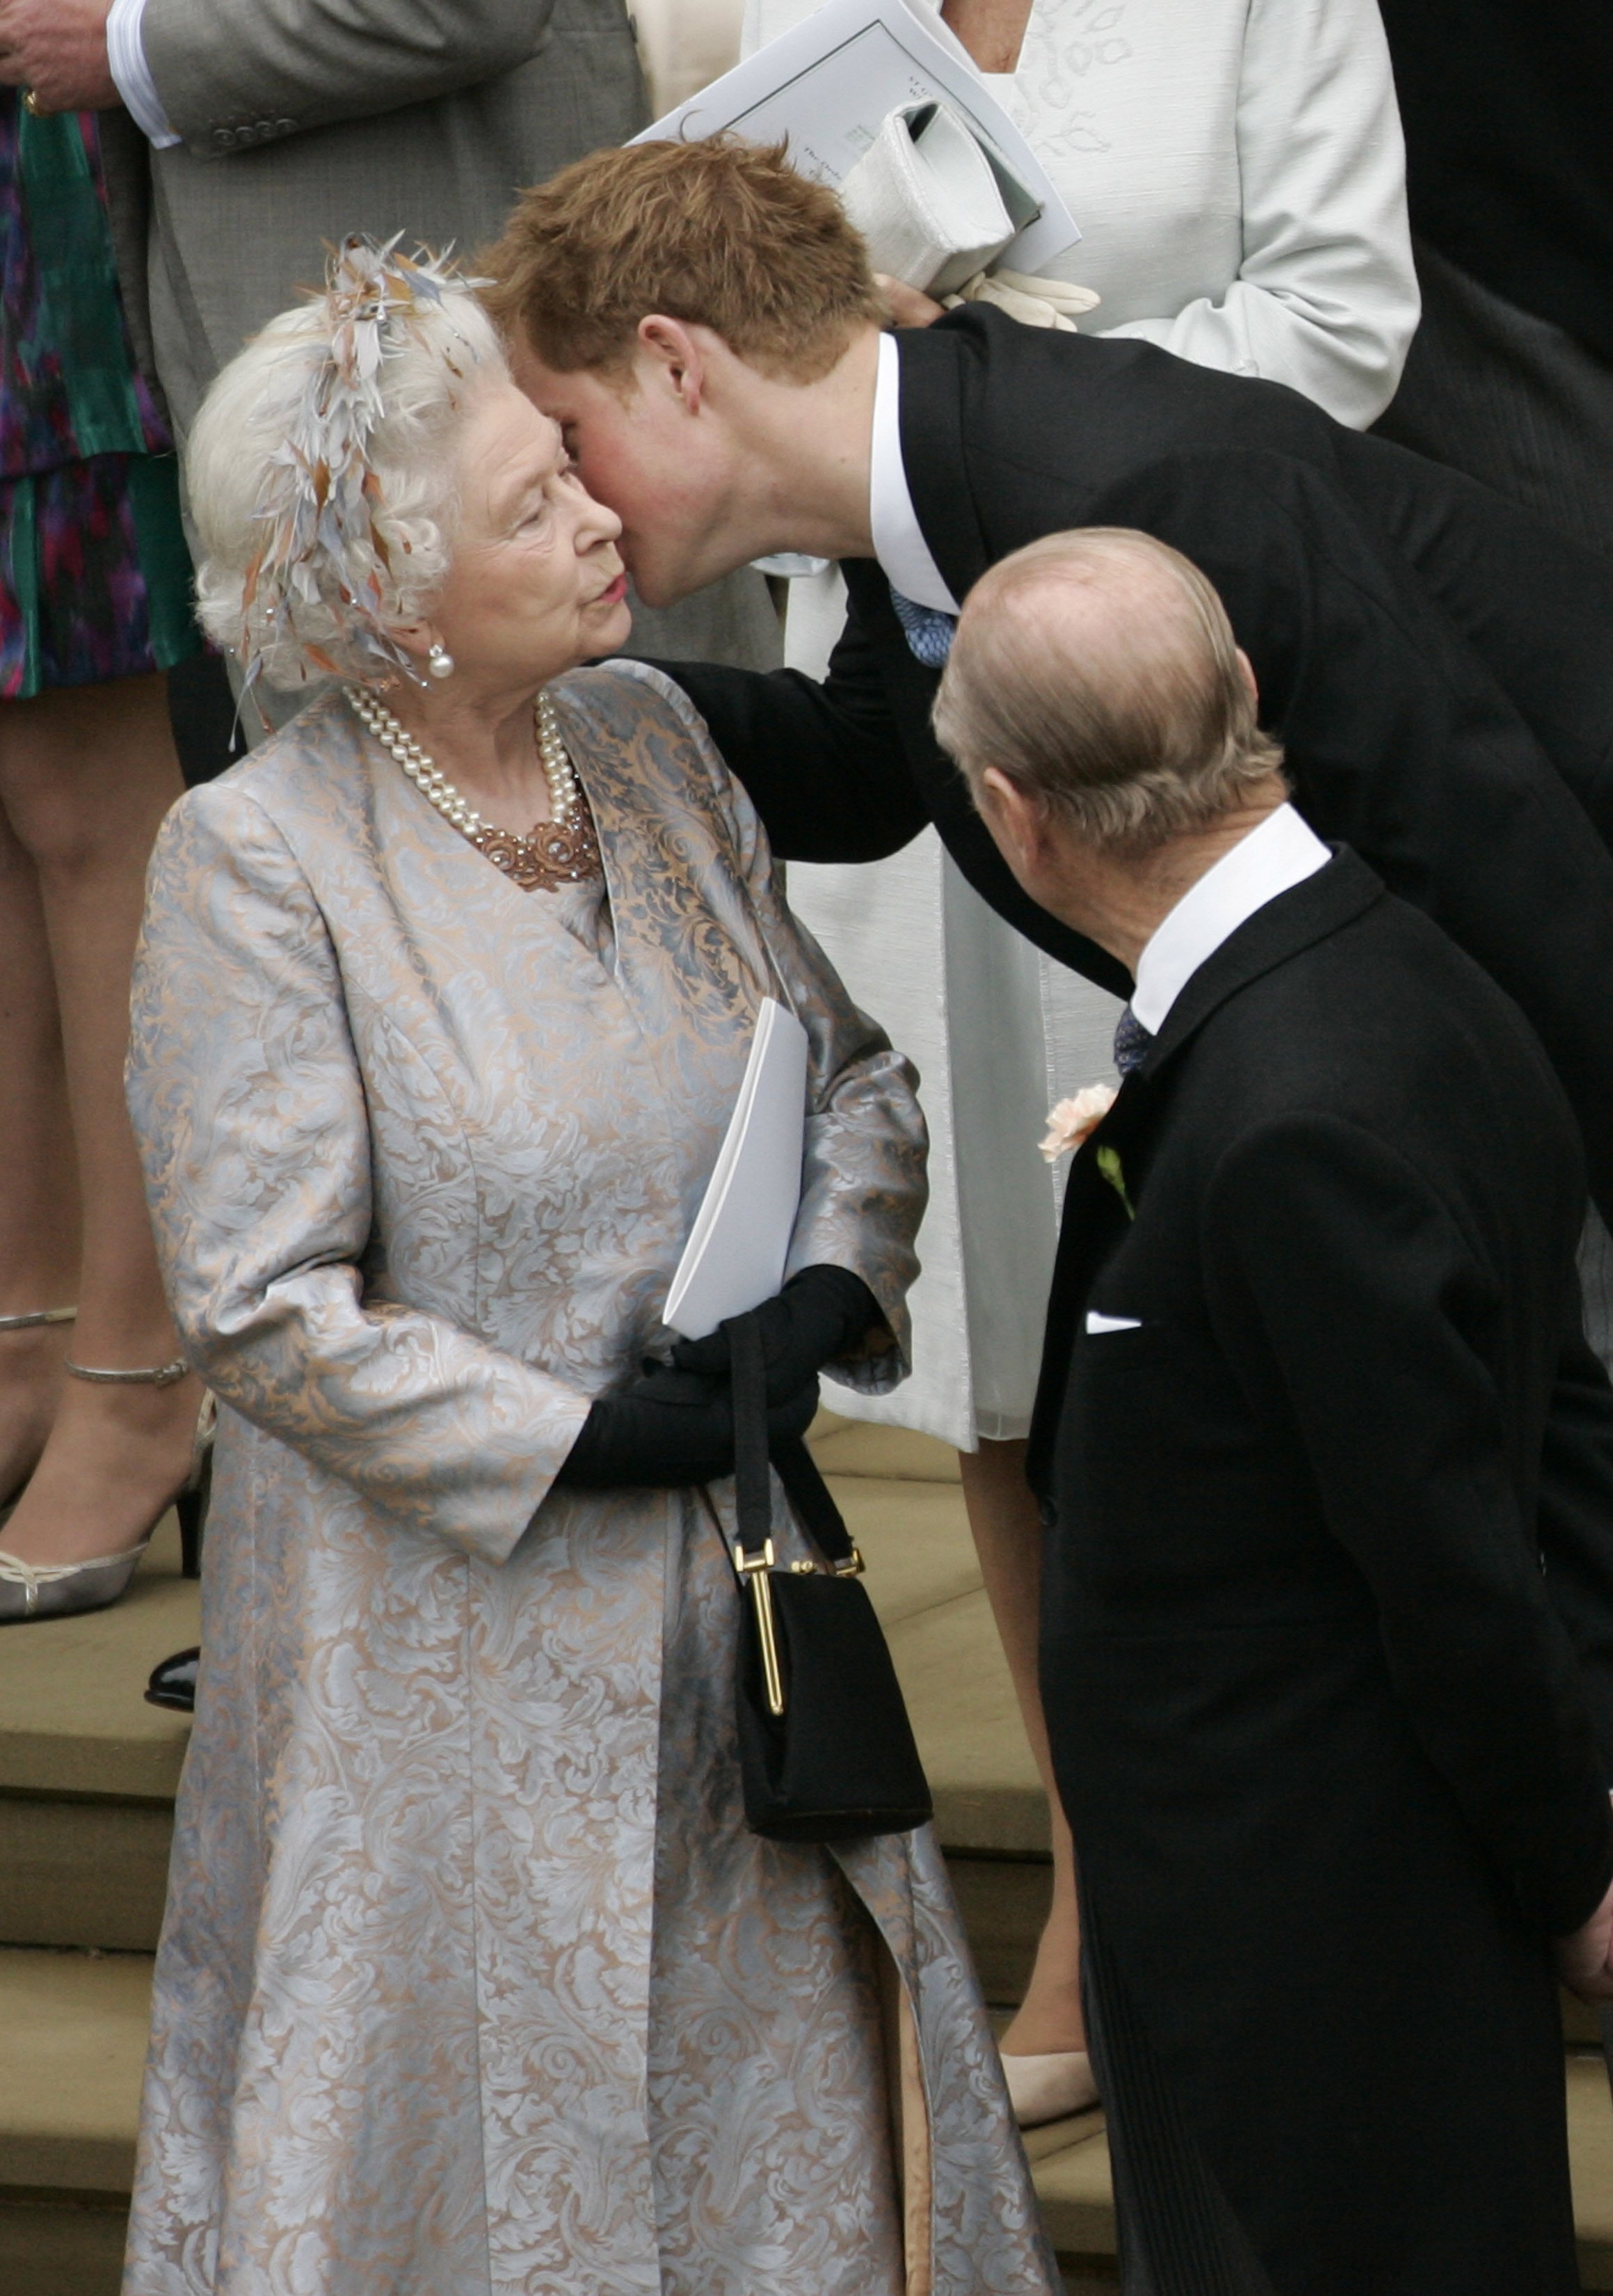  Prince Harry kisses his grandmother Queen Elizabeth II after the wedding of Peter Phillips to Autumn Kelly, at St George's Chapel in Windsor Castle on May 17, 2008 in Windsor, England | Source: Getty Images 